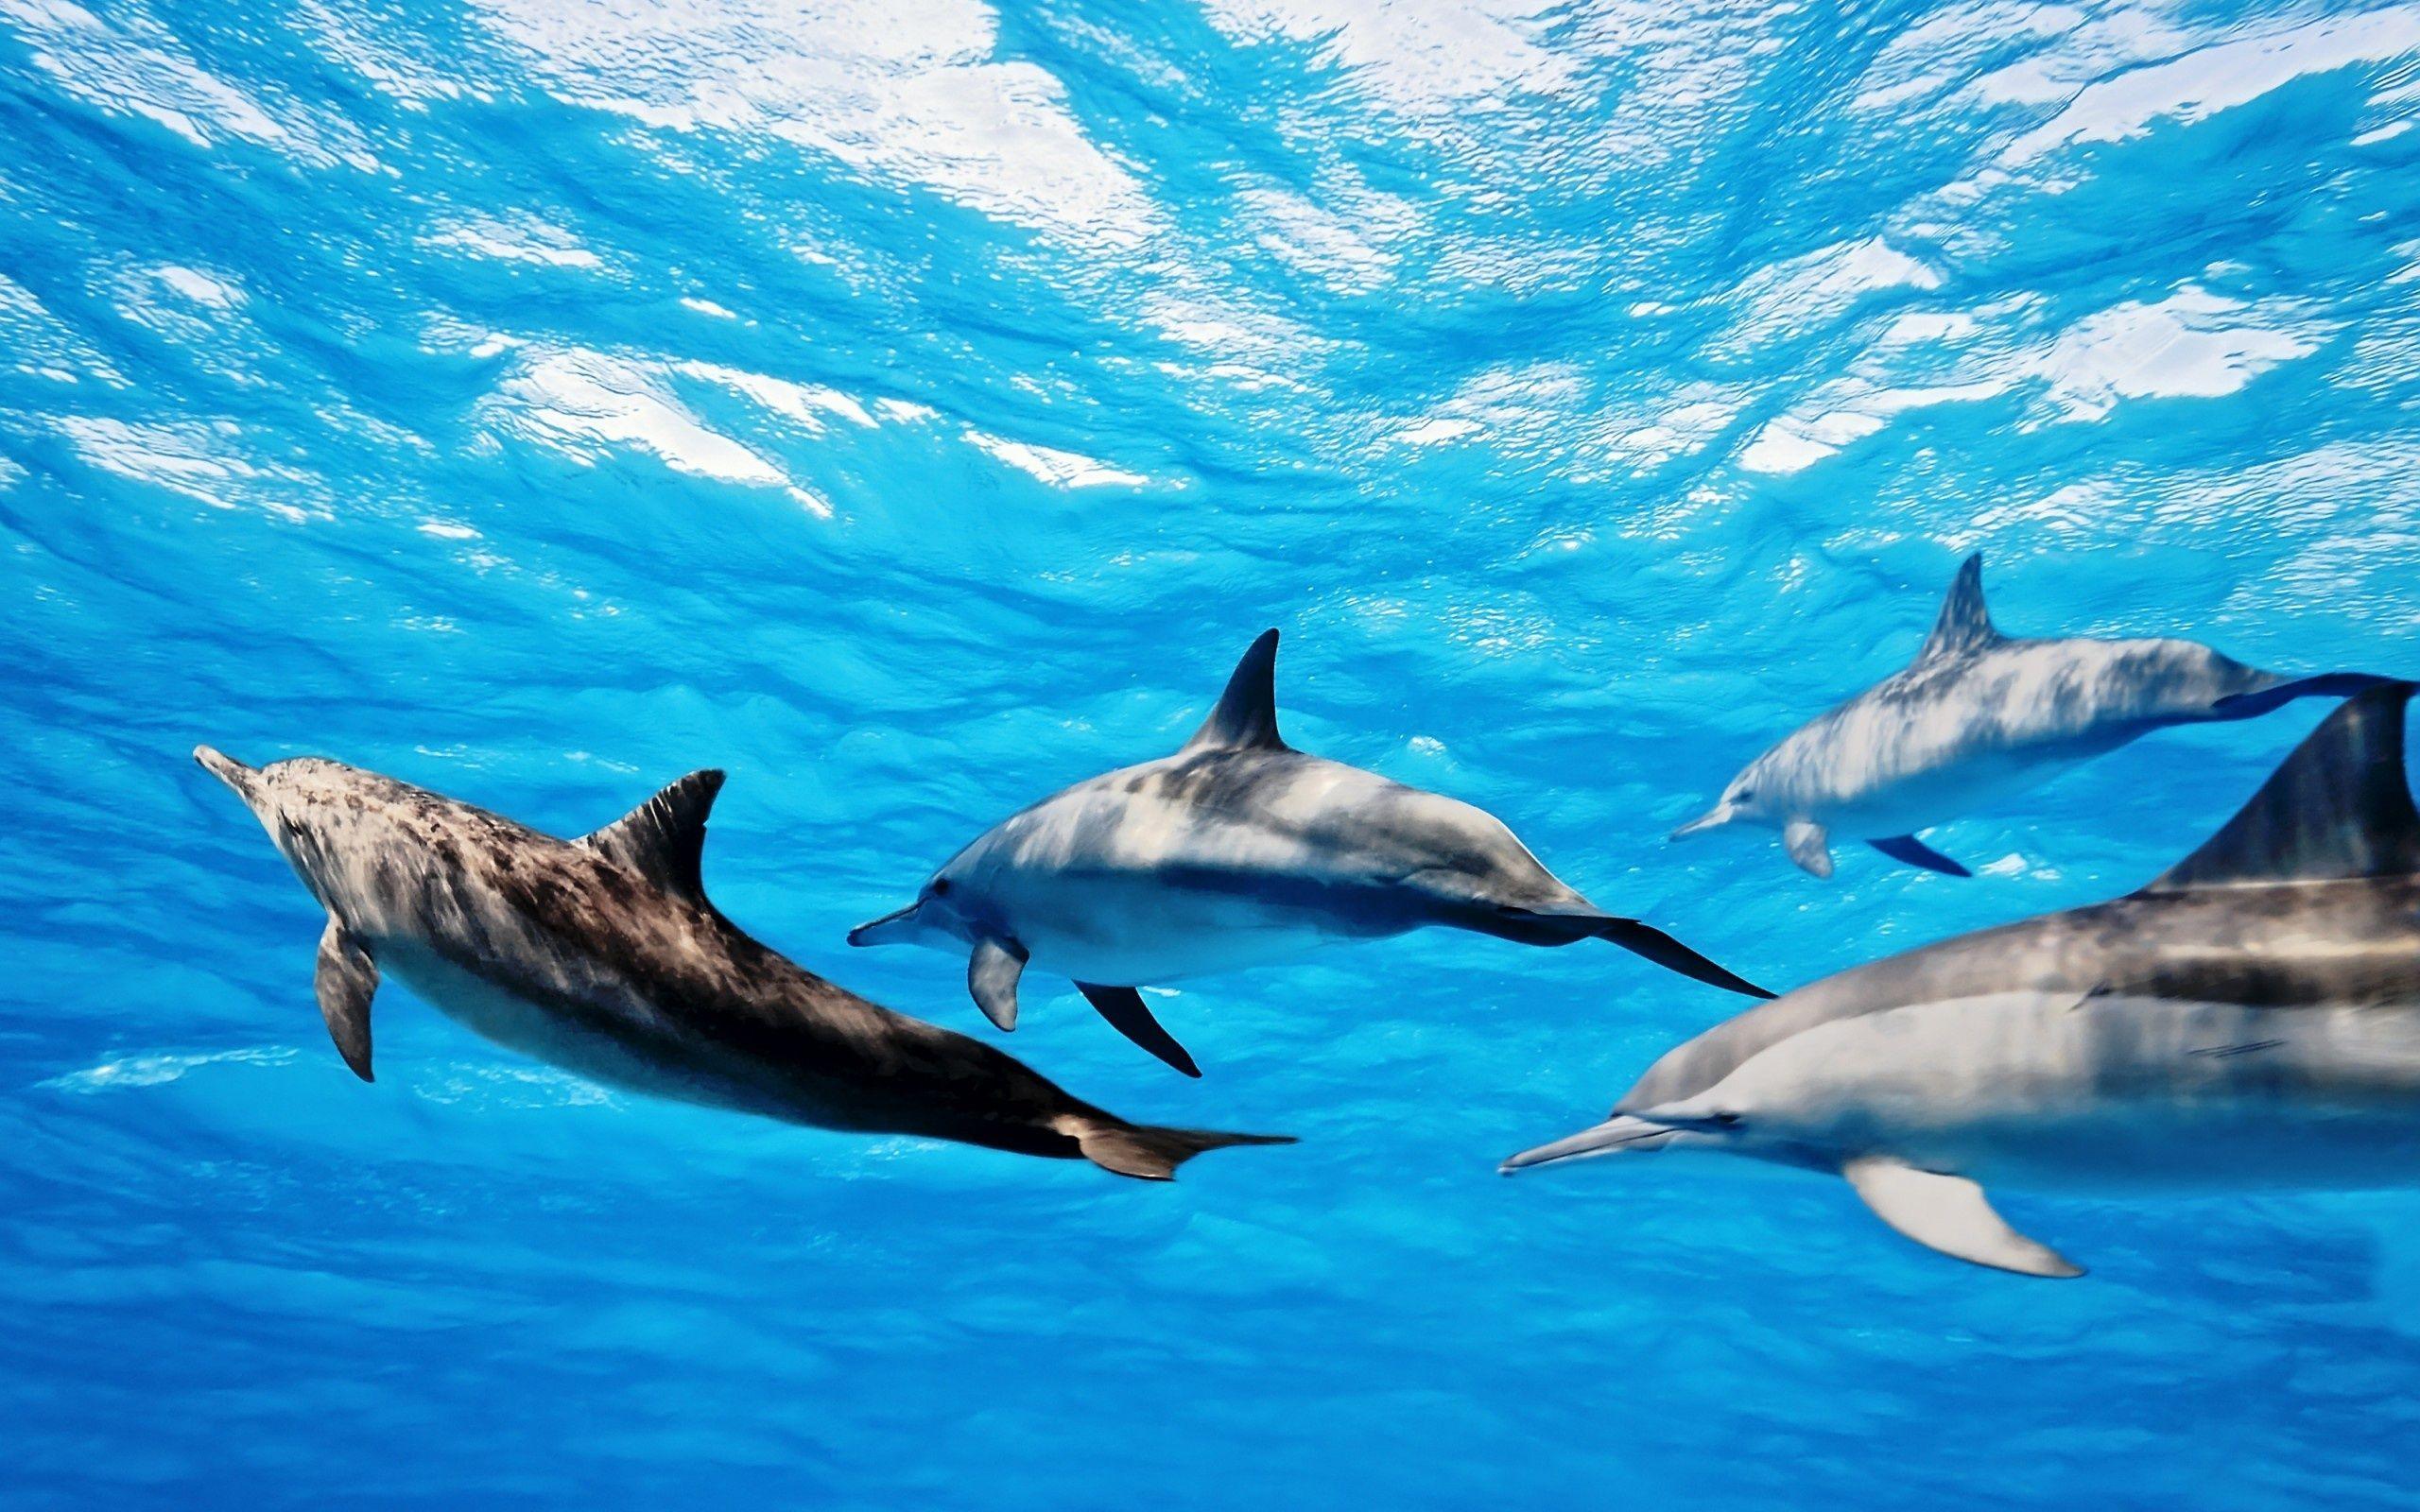 Dolphin Wallpapers Hd Wallpaper Cave